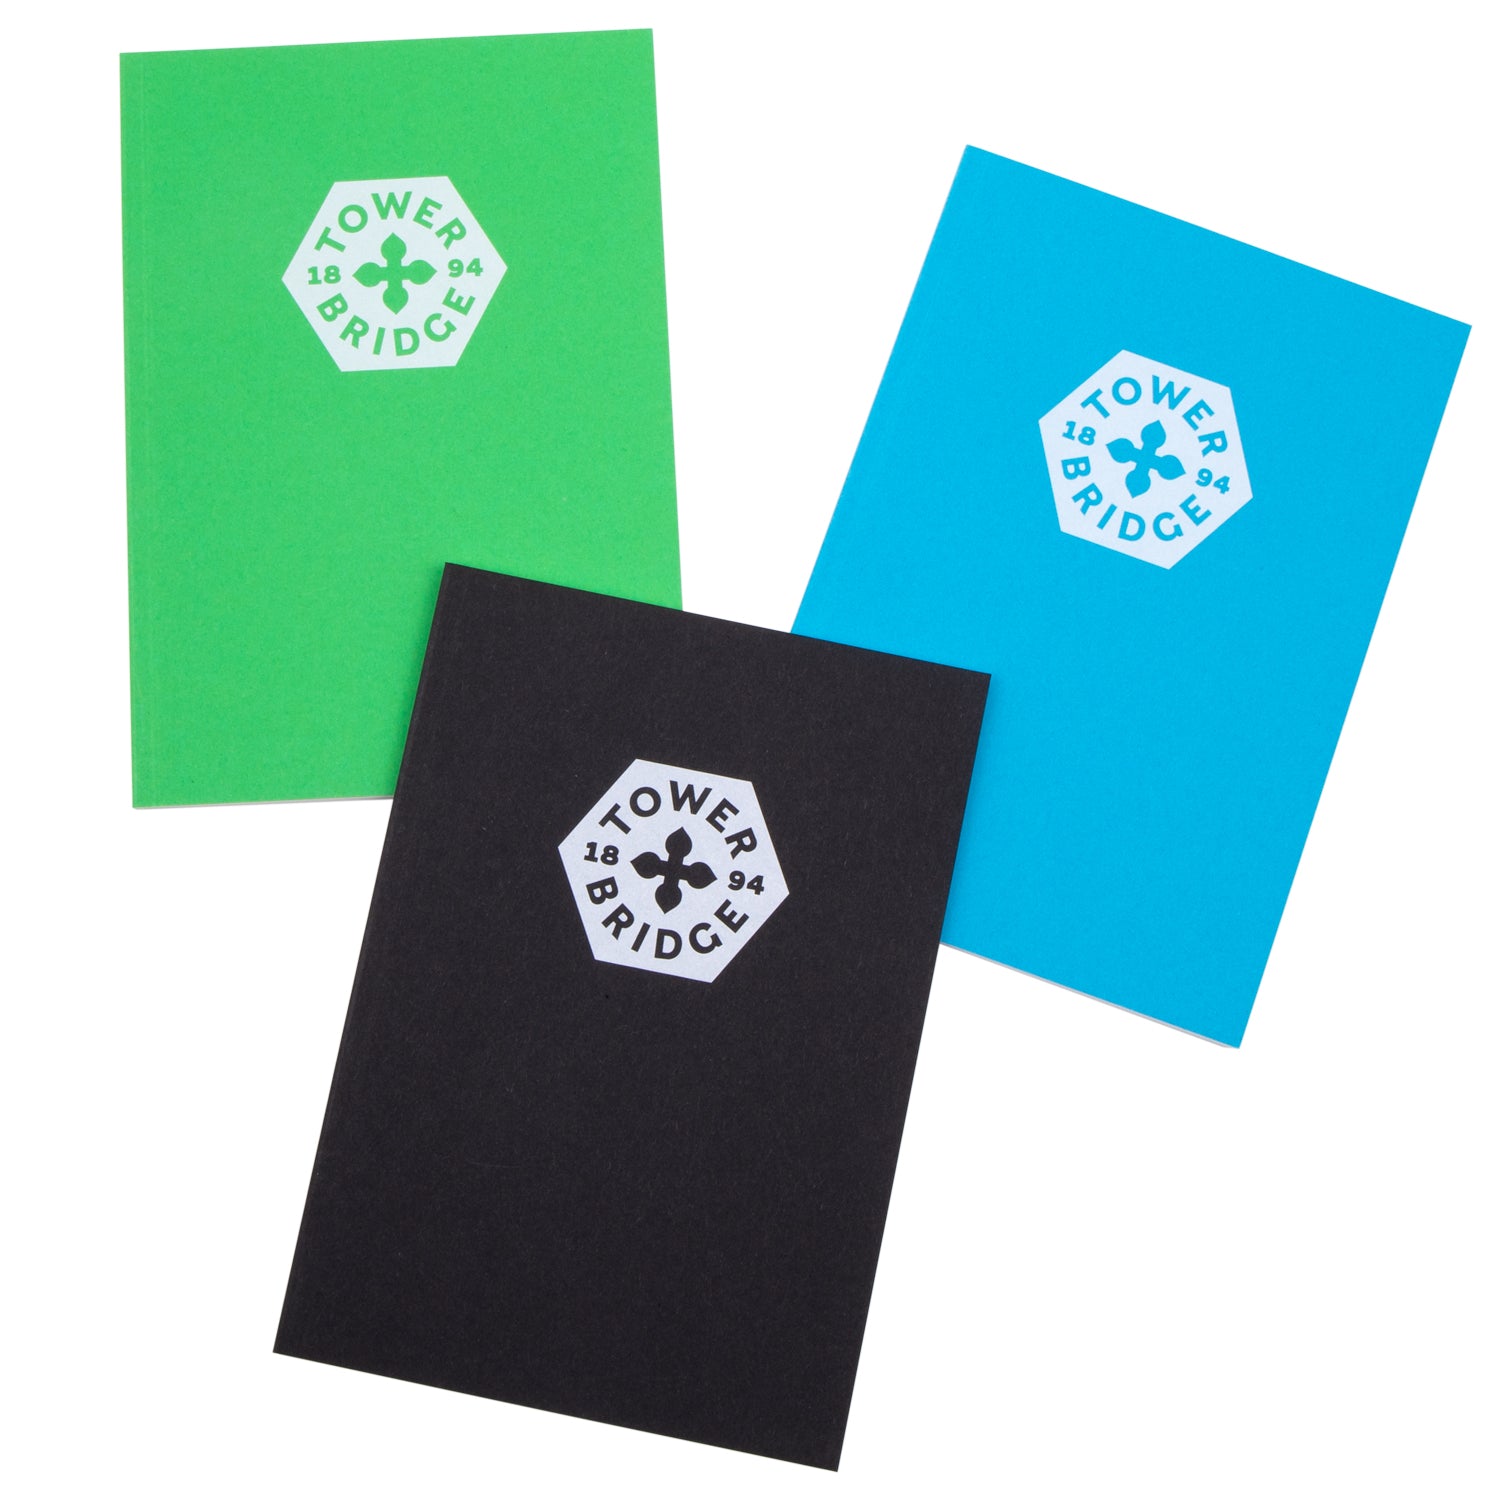 Tower Bridge Eco Recycled Till Receipts Notebook A5 - Group 1